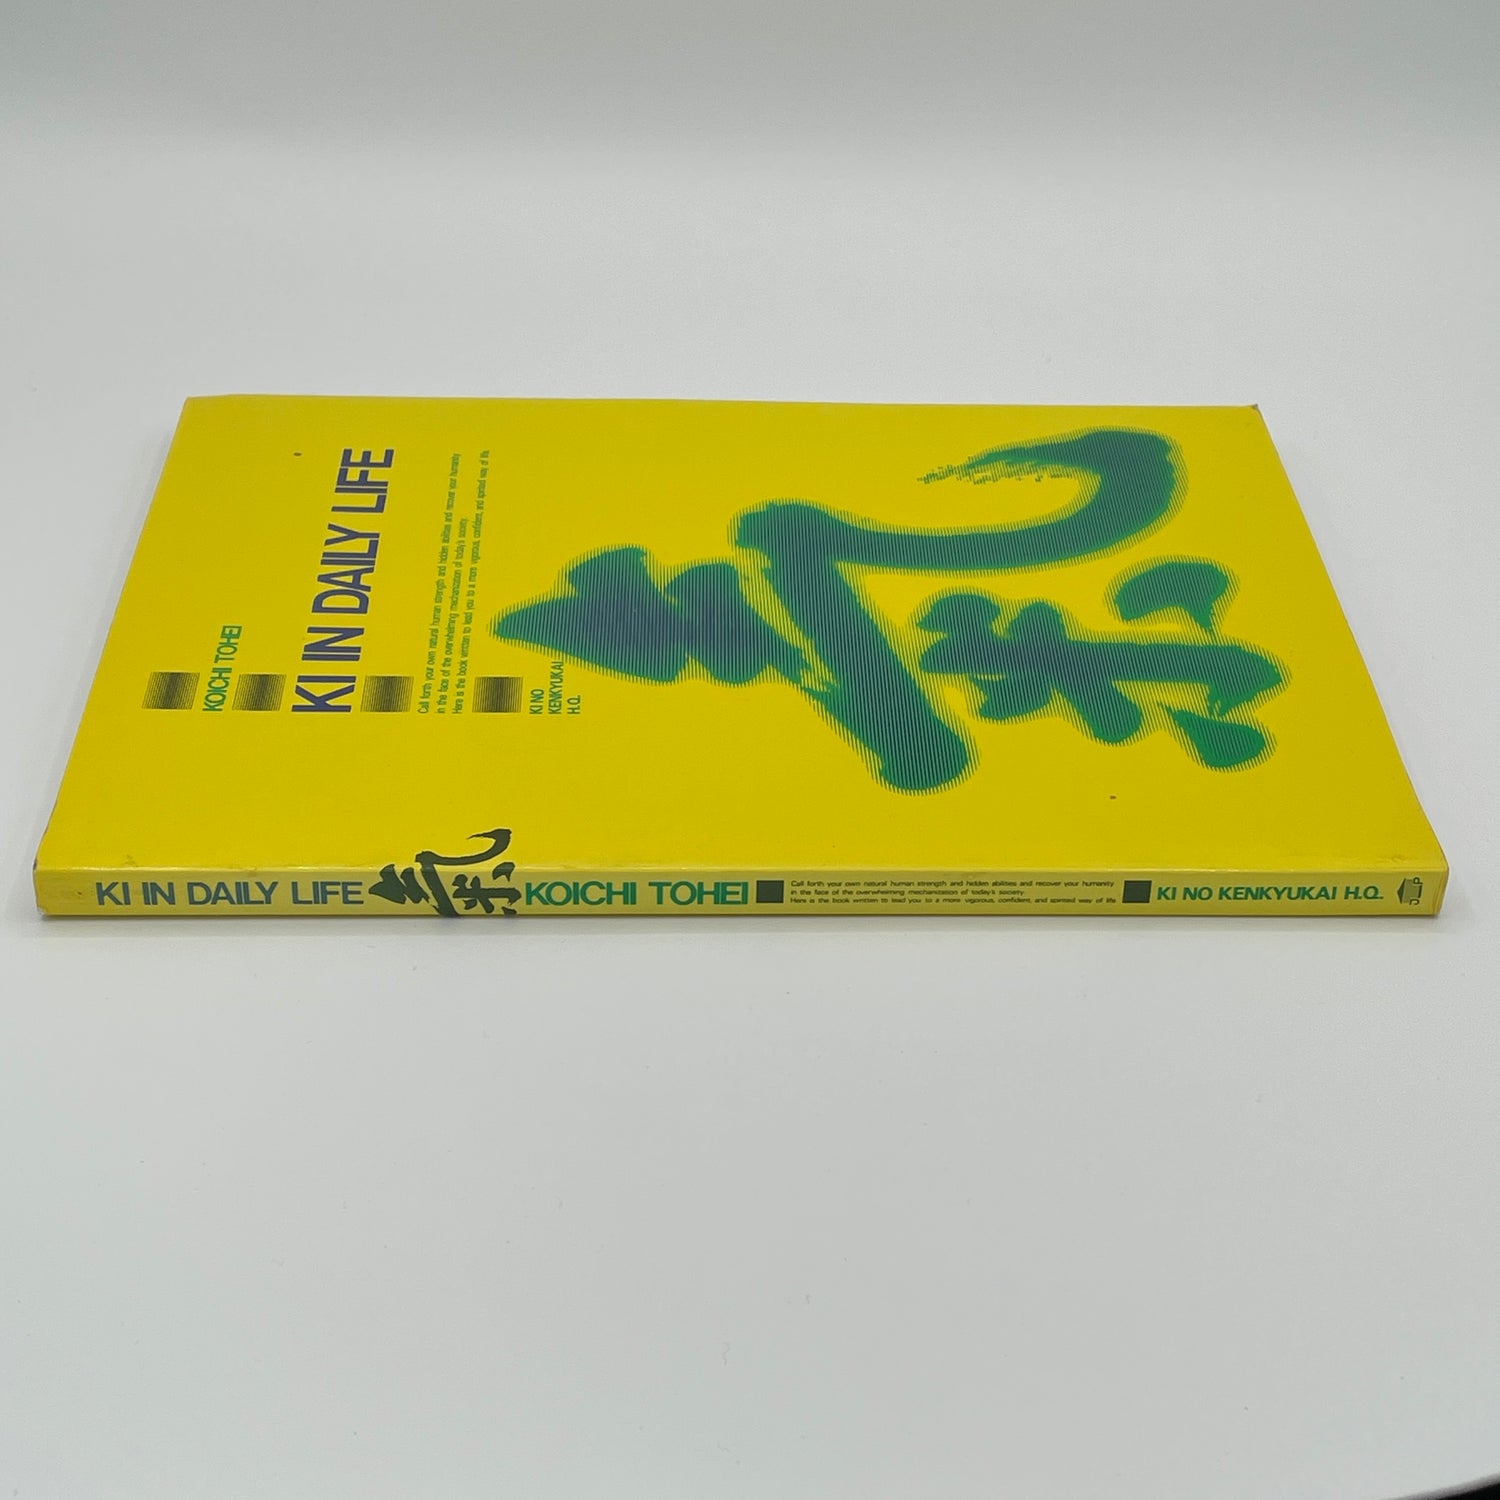 Ki in Daily Life Book by Koichi Tohei (1st Edition) (Preowned)